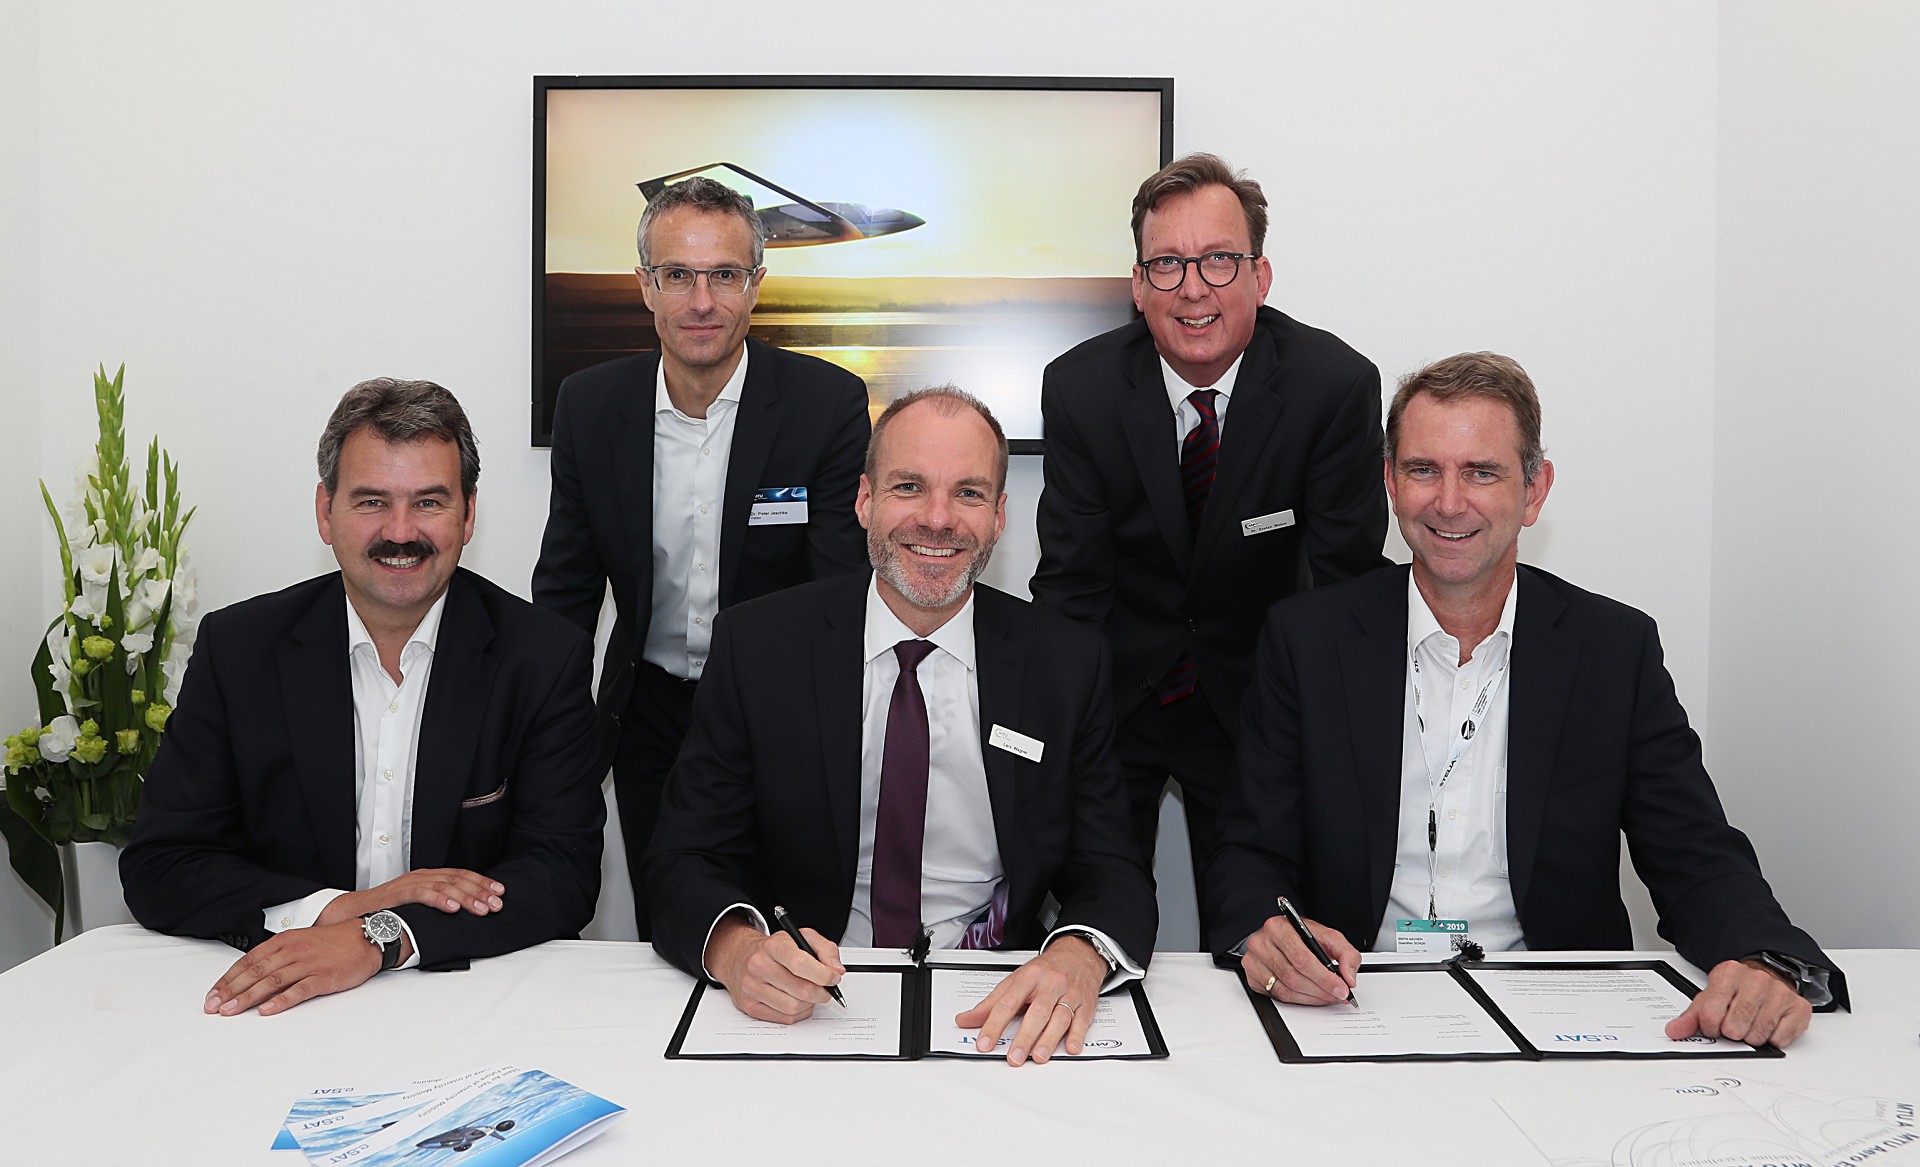 © e.SAT GmbH | Caption: Signing of the LoI in the MTU chalet (from left to right): Prof. Dr. Frank Janser, Prof. Dr. Peter Jeschke, Lars Wagner, Dr. Stefan Weber and Prof. Dr. Günther Schuh.